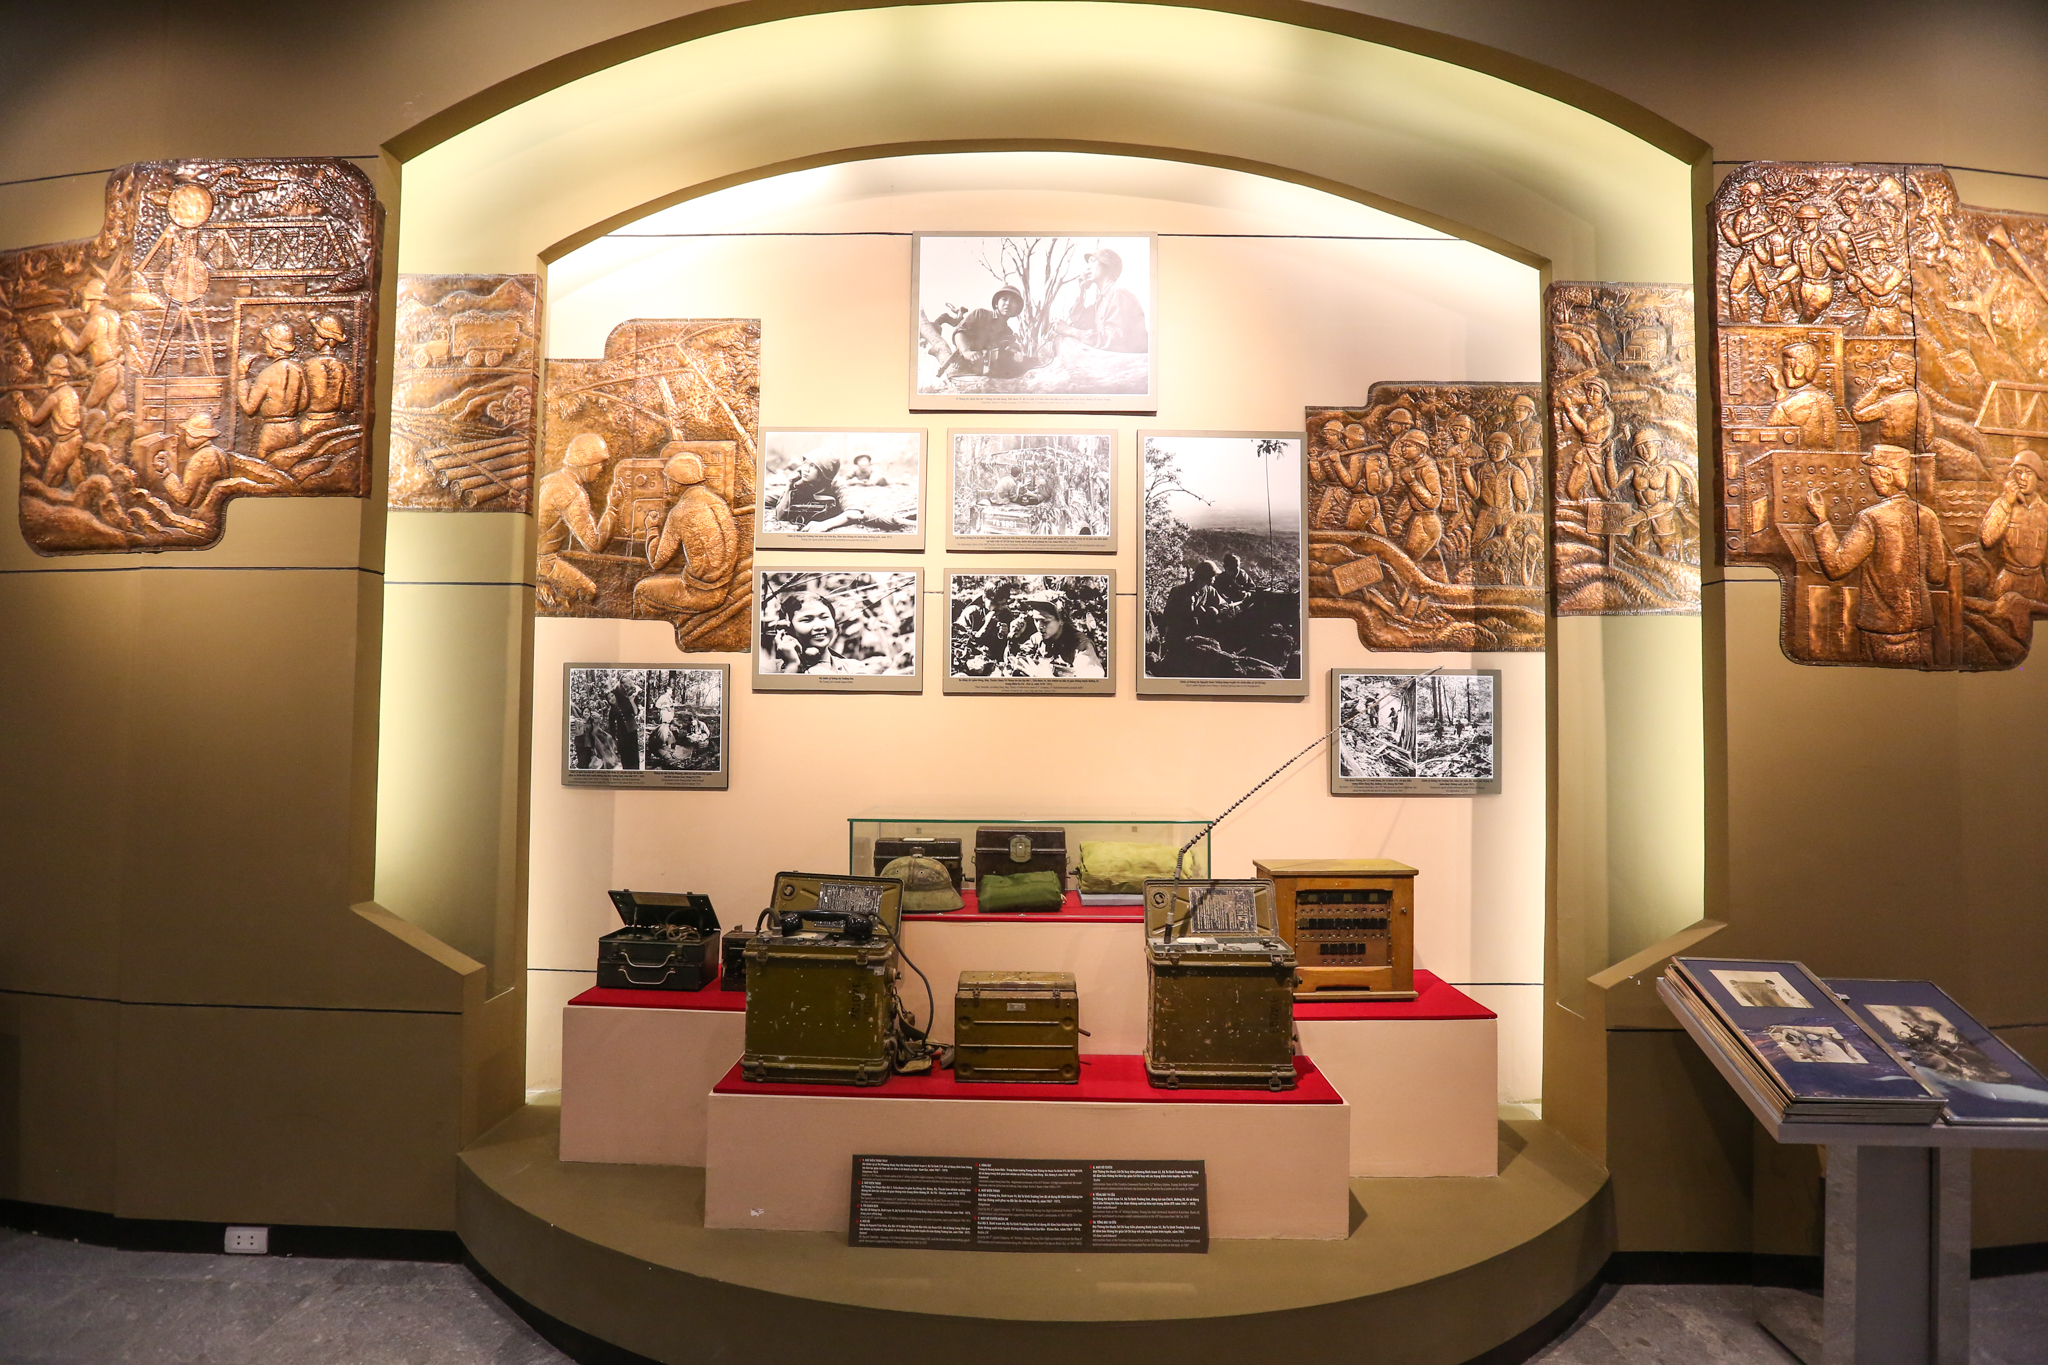 With over 15,000 original items, the museum is among big ones in the museum system of Vietnam.